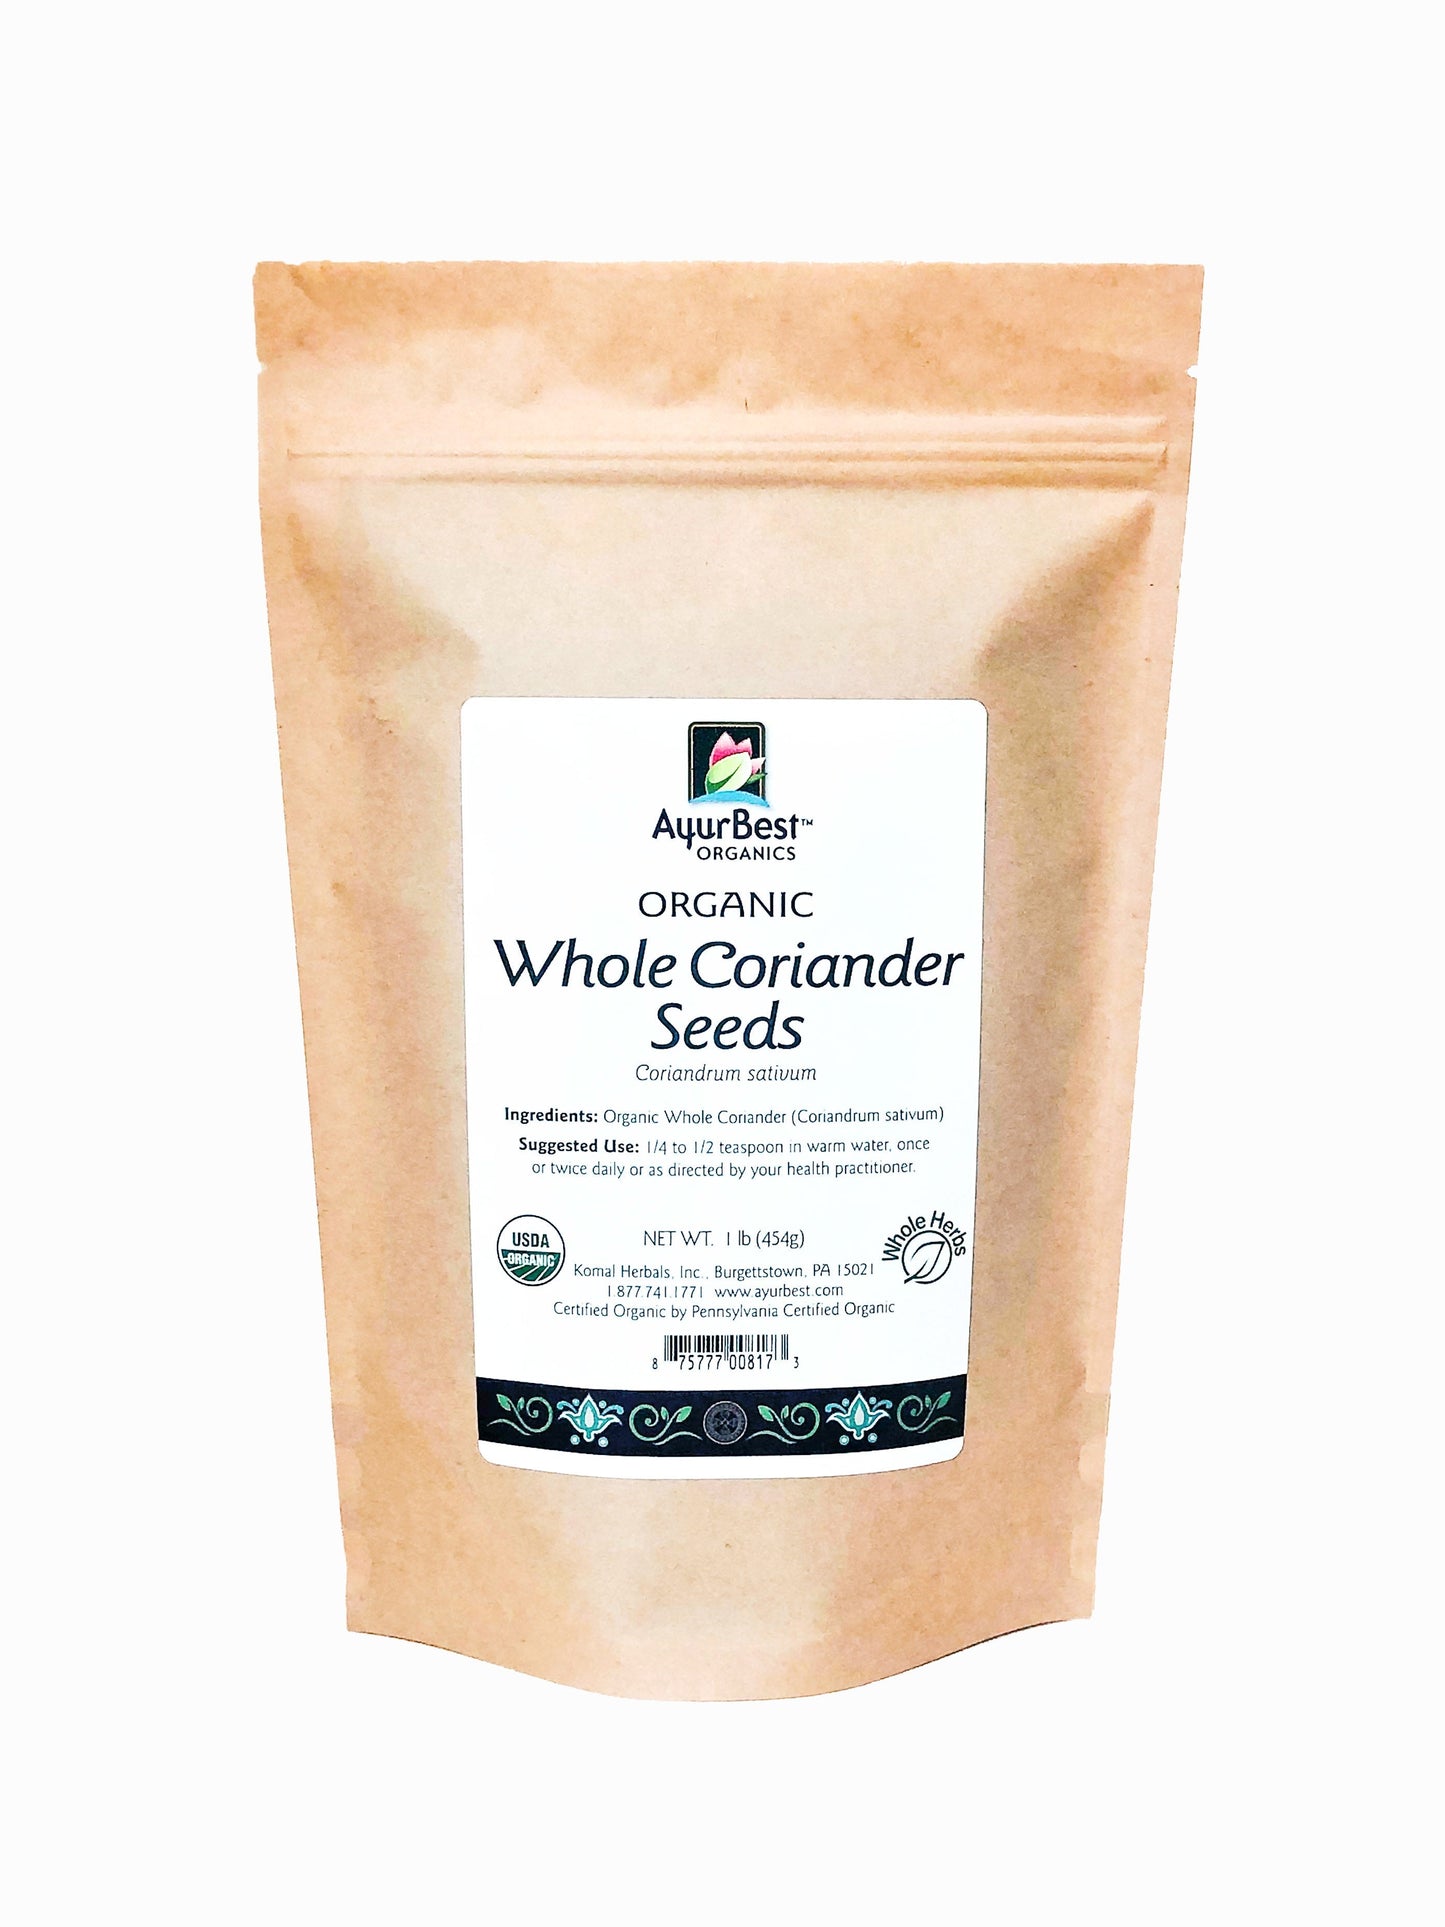 Wholesale Spices & Herbs - Coriander Seed Whole, Organic 1lb (4554g) Bag